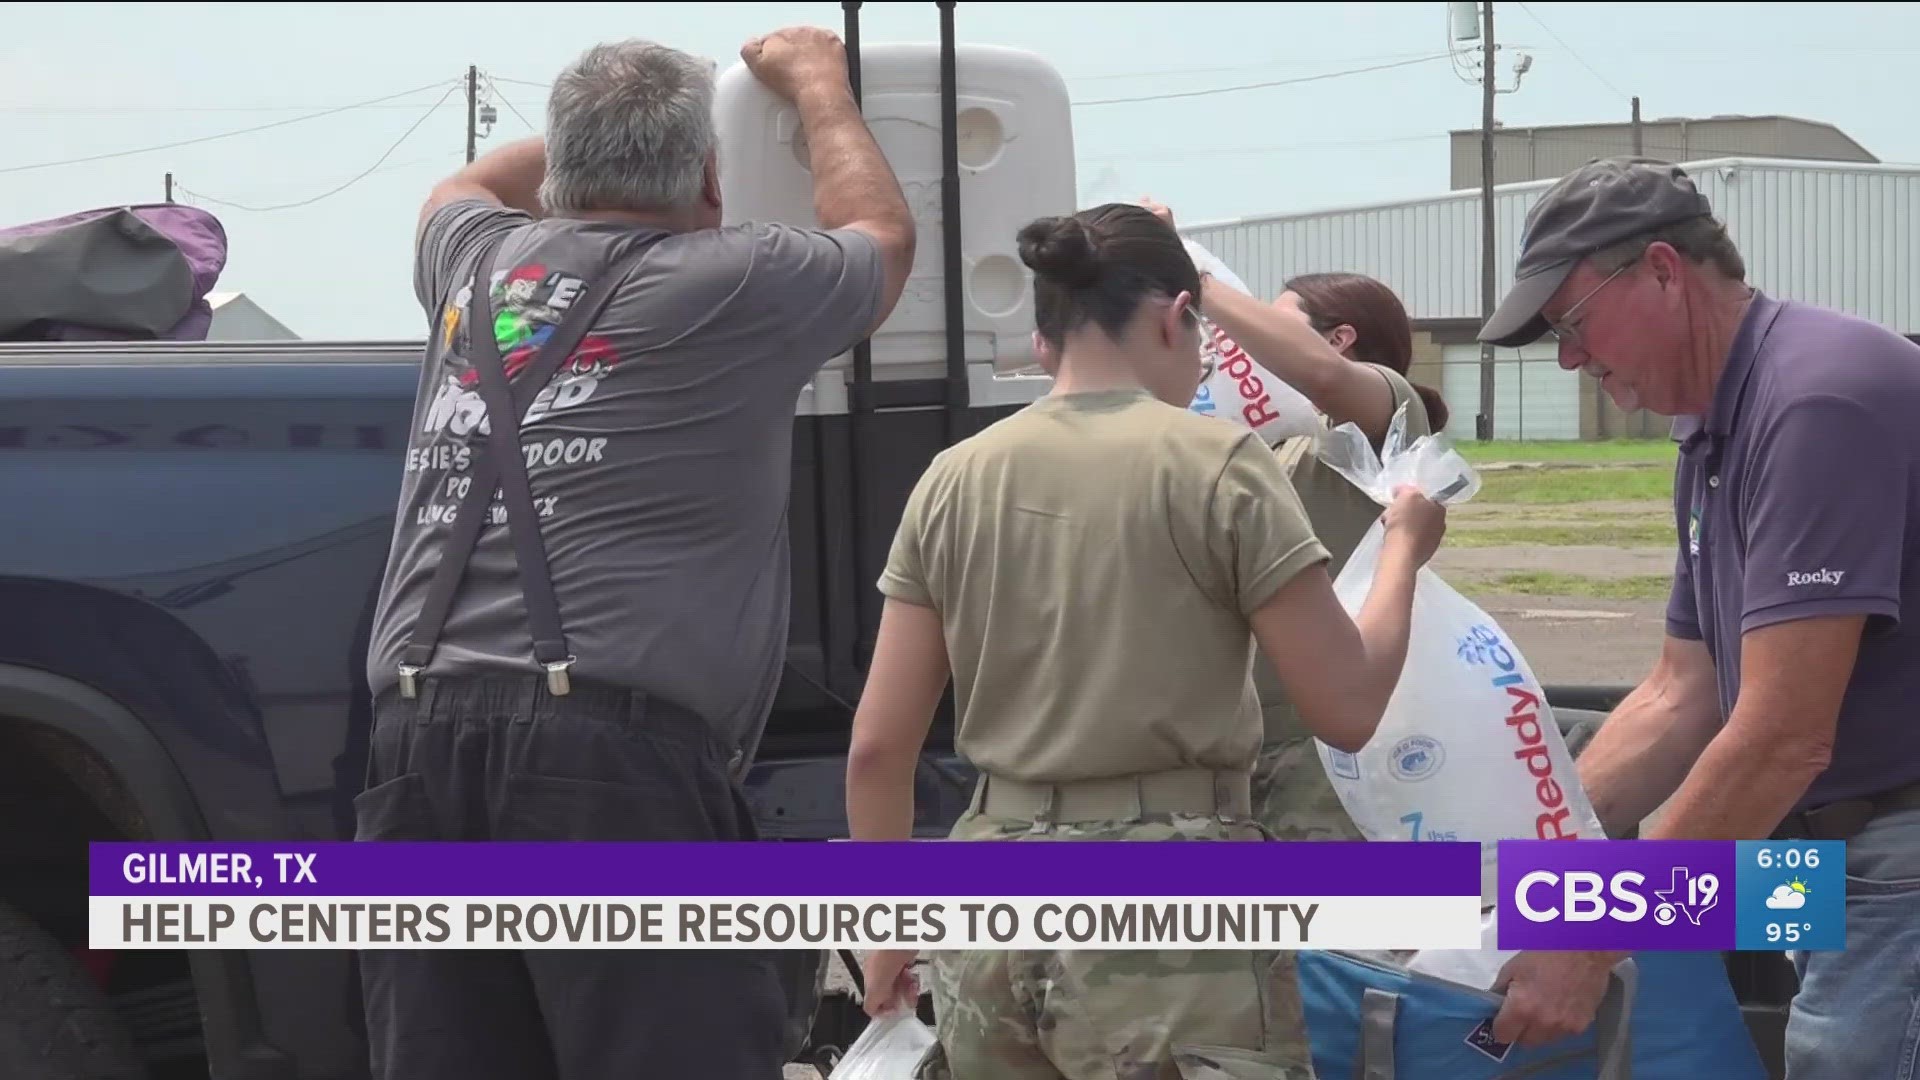 The help center provides cases of water, bags of ice and ready to eat meals for the community at Yamboree Park.